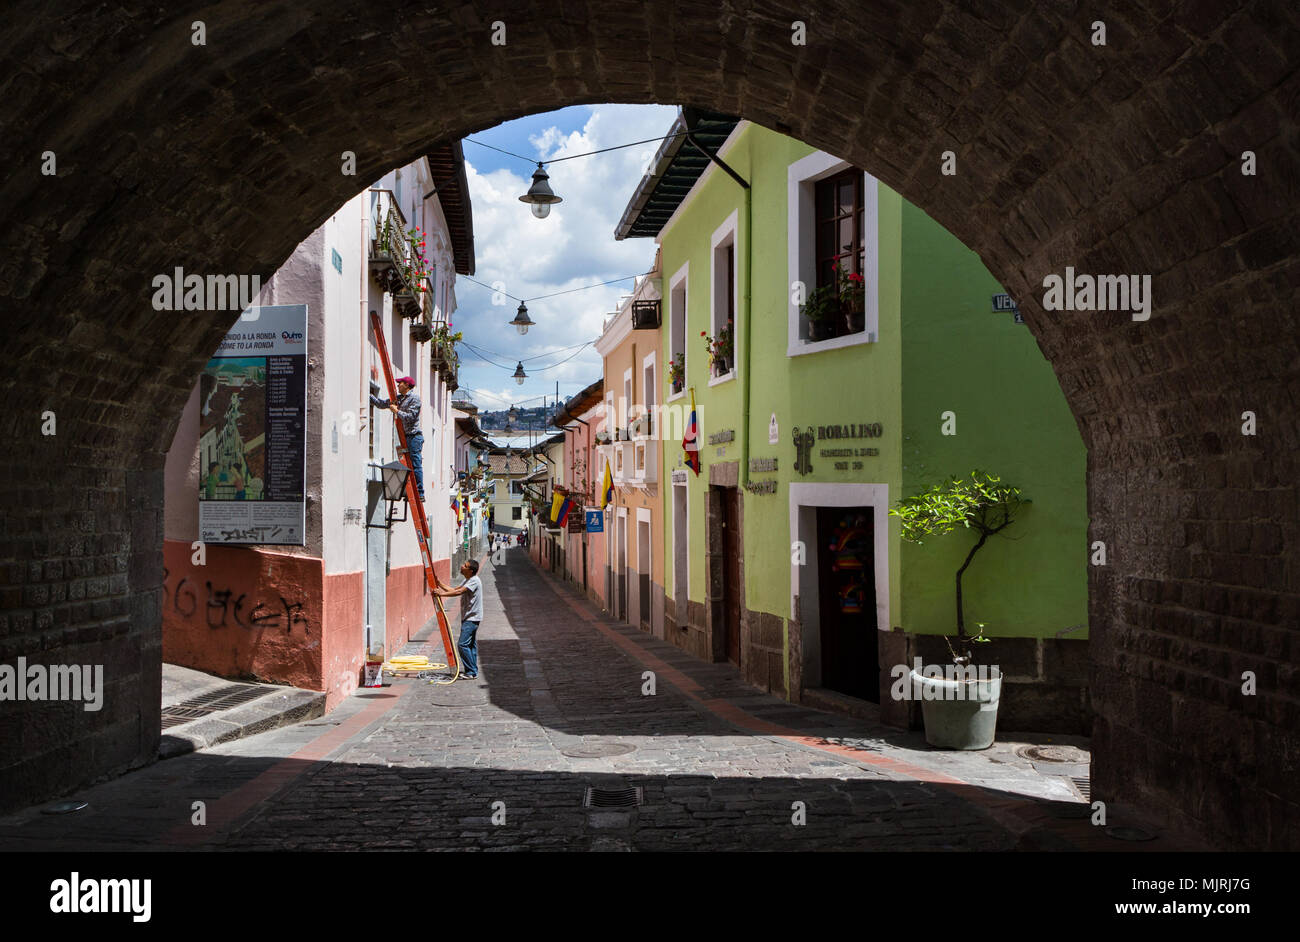 QUITO, ECUADOR - OCTOBER 27, 2015: workers fix a window in Calle La Ronda, typical and colorful colonial street in historic district, viewed through t Stock Photo